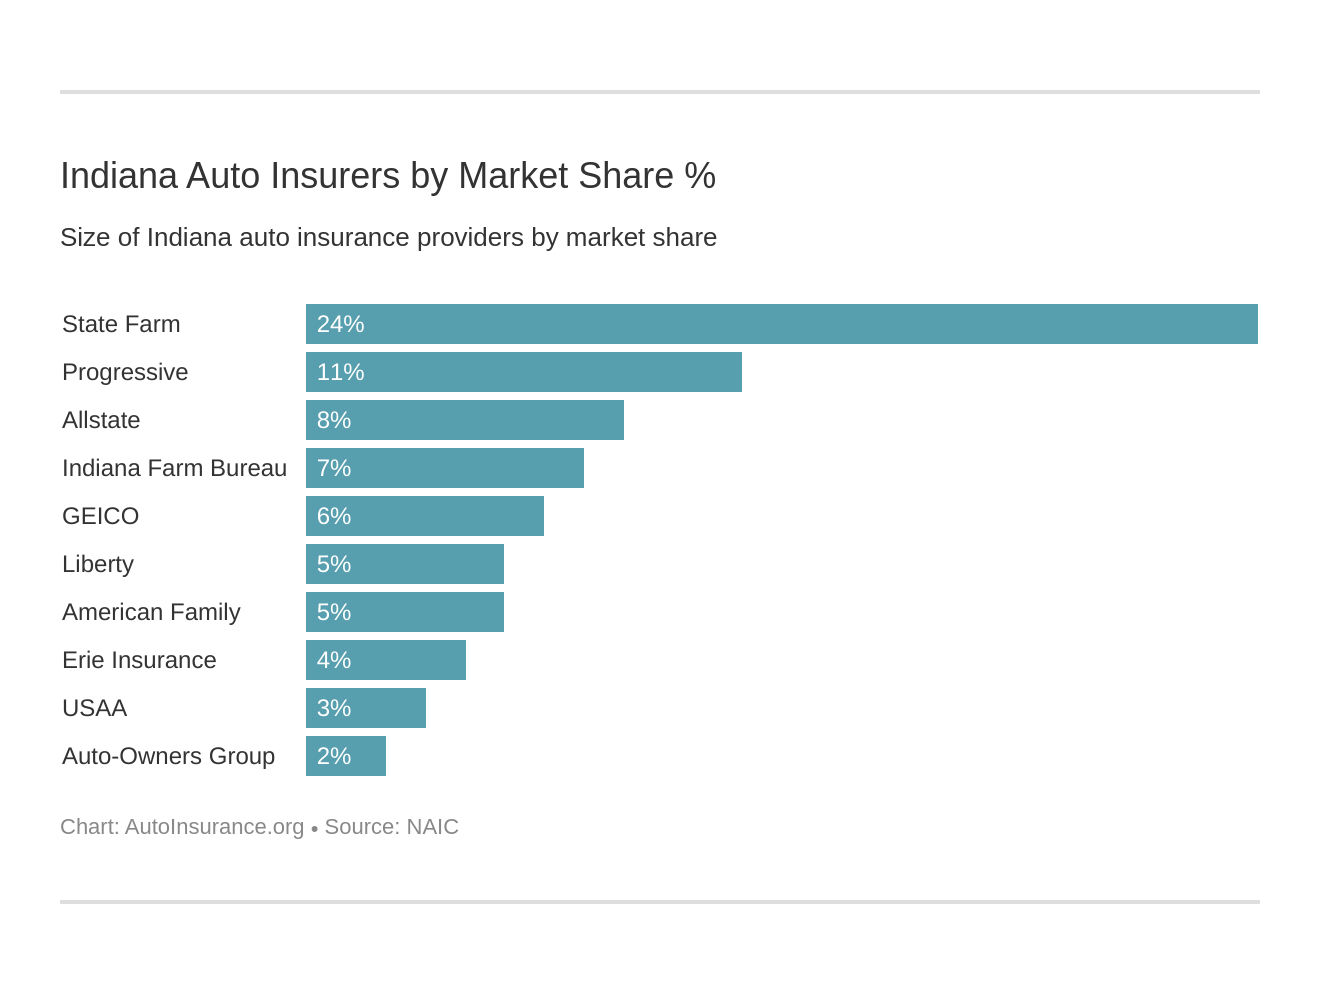 Indiana Auto Insurers by Market Share %